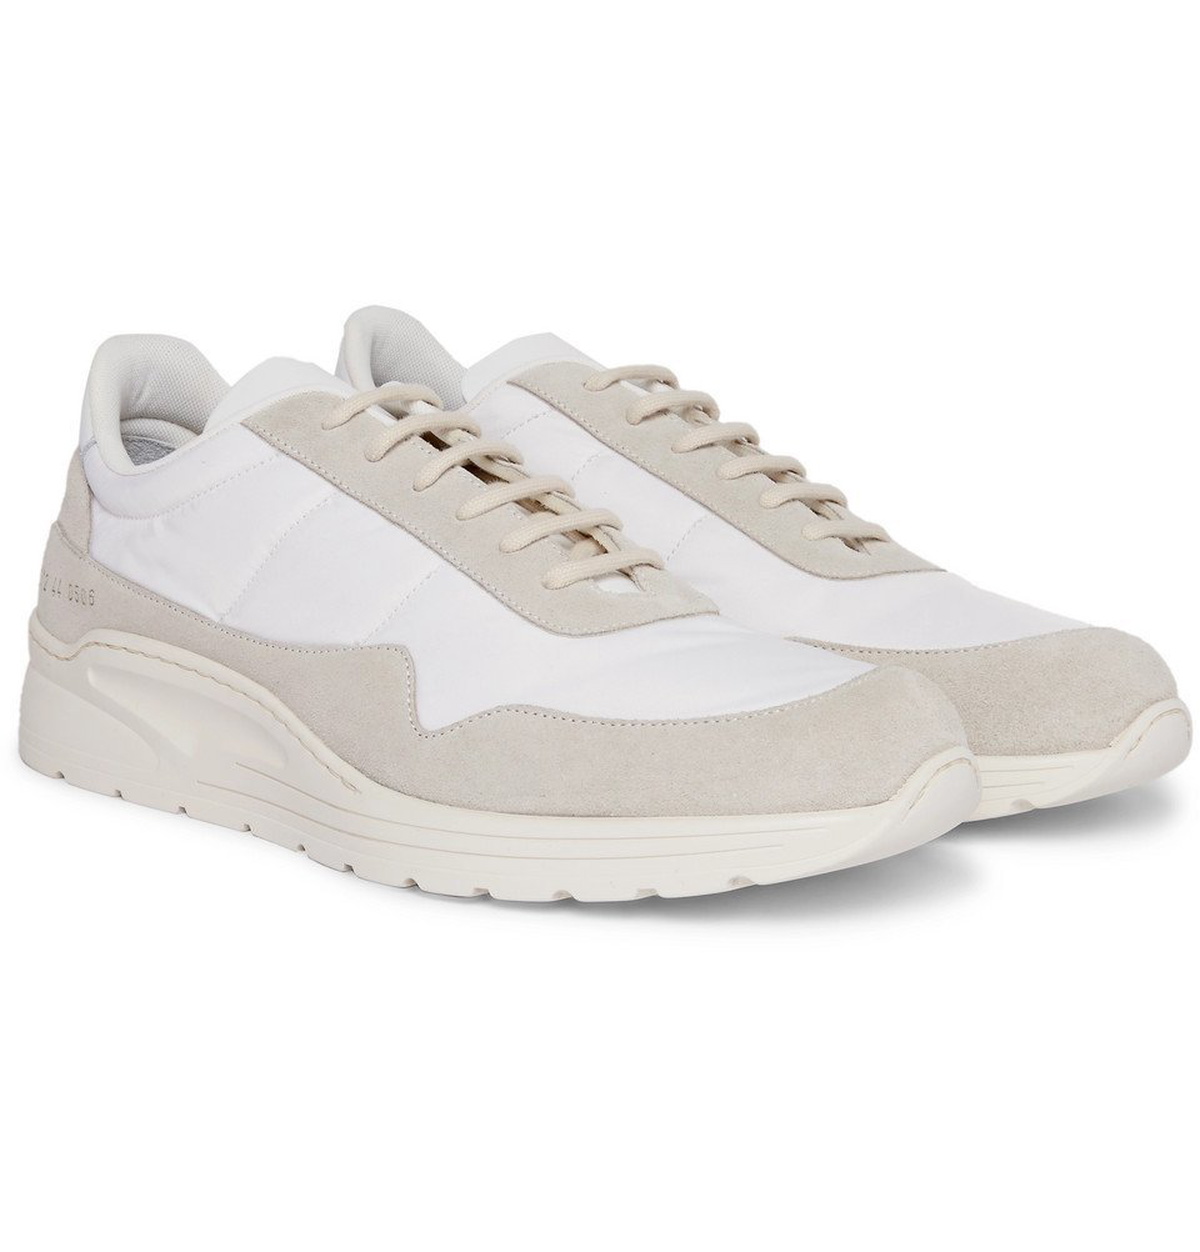 Common Projects - Cross Trainer Suede, Nylon and Leather Sneakers ...